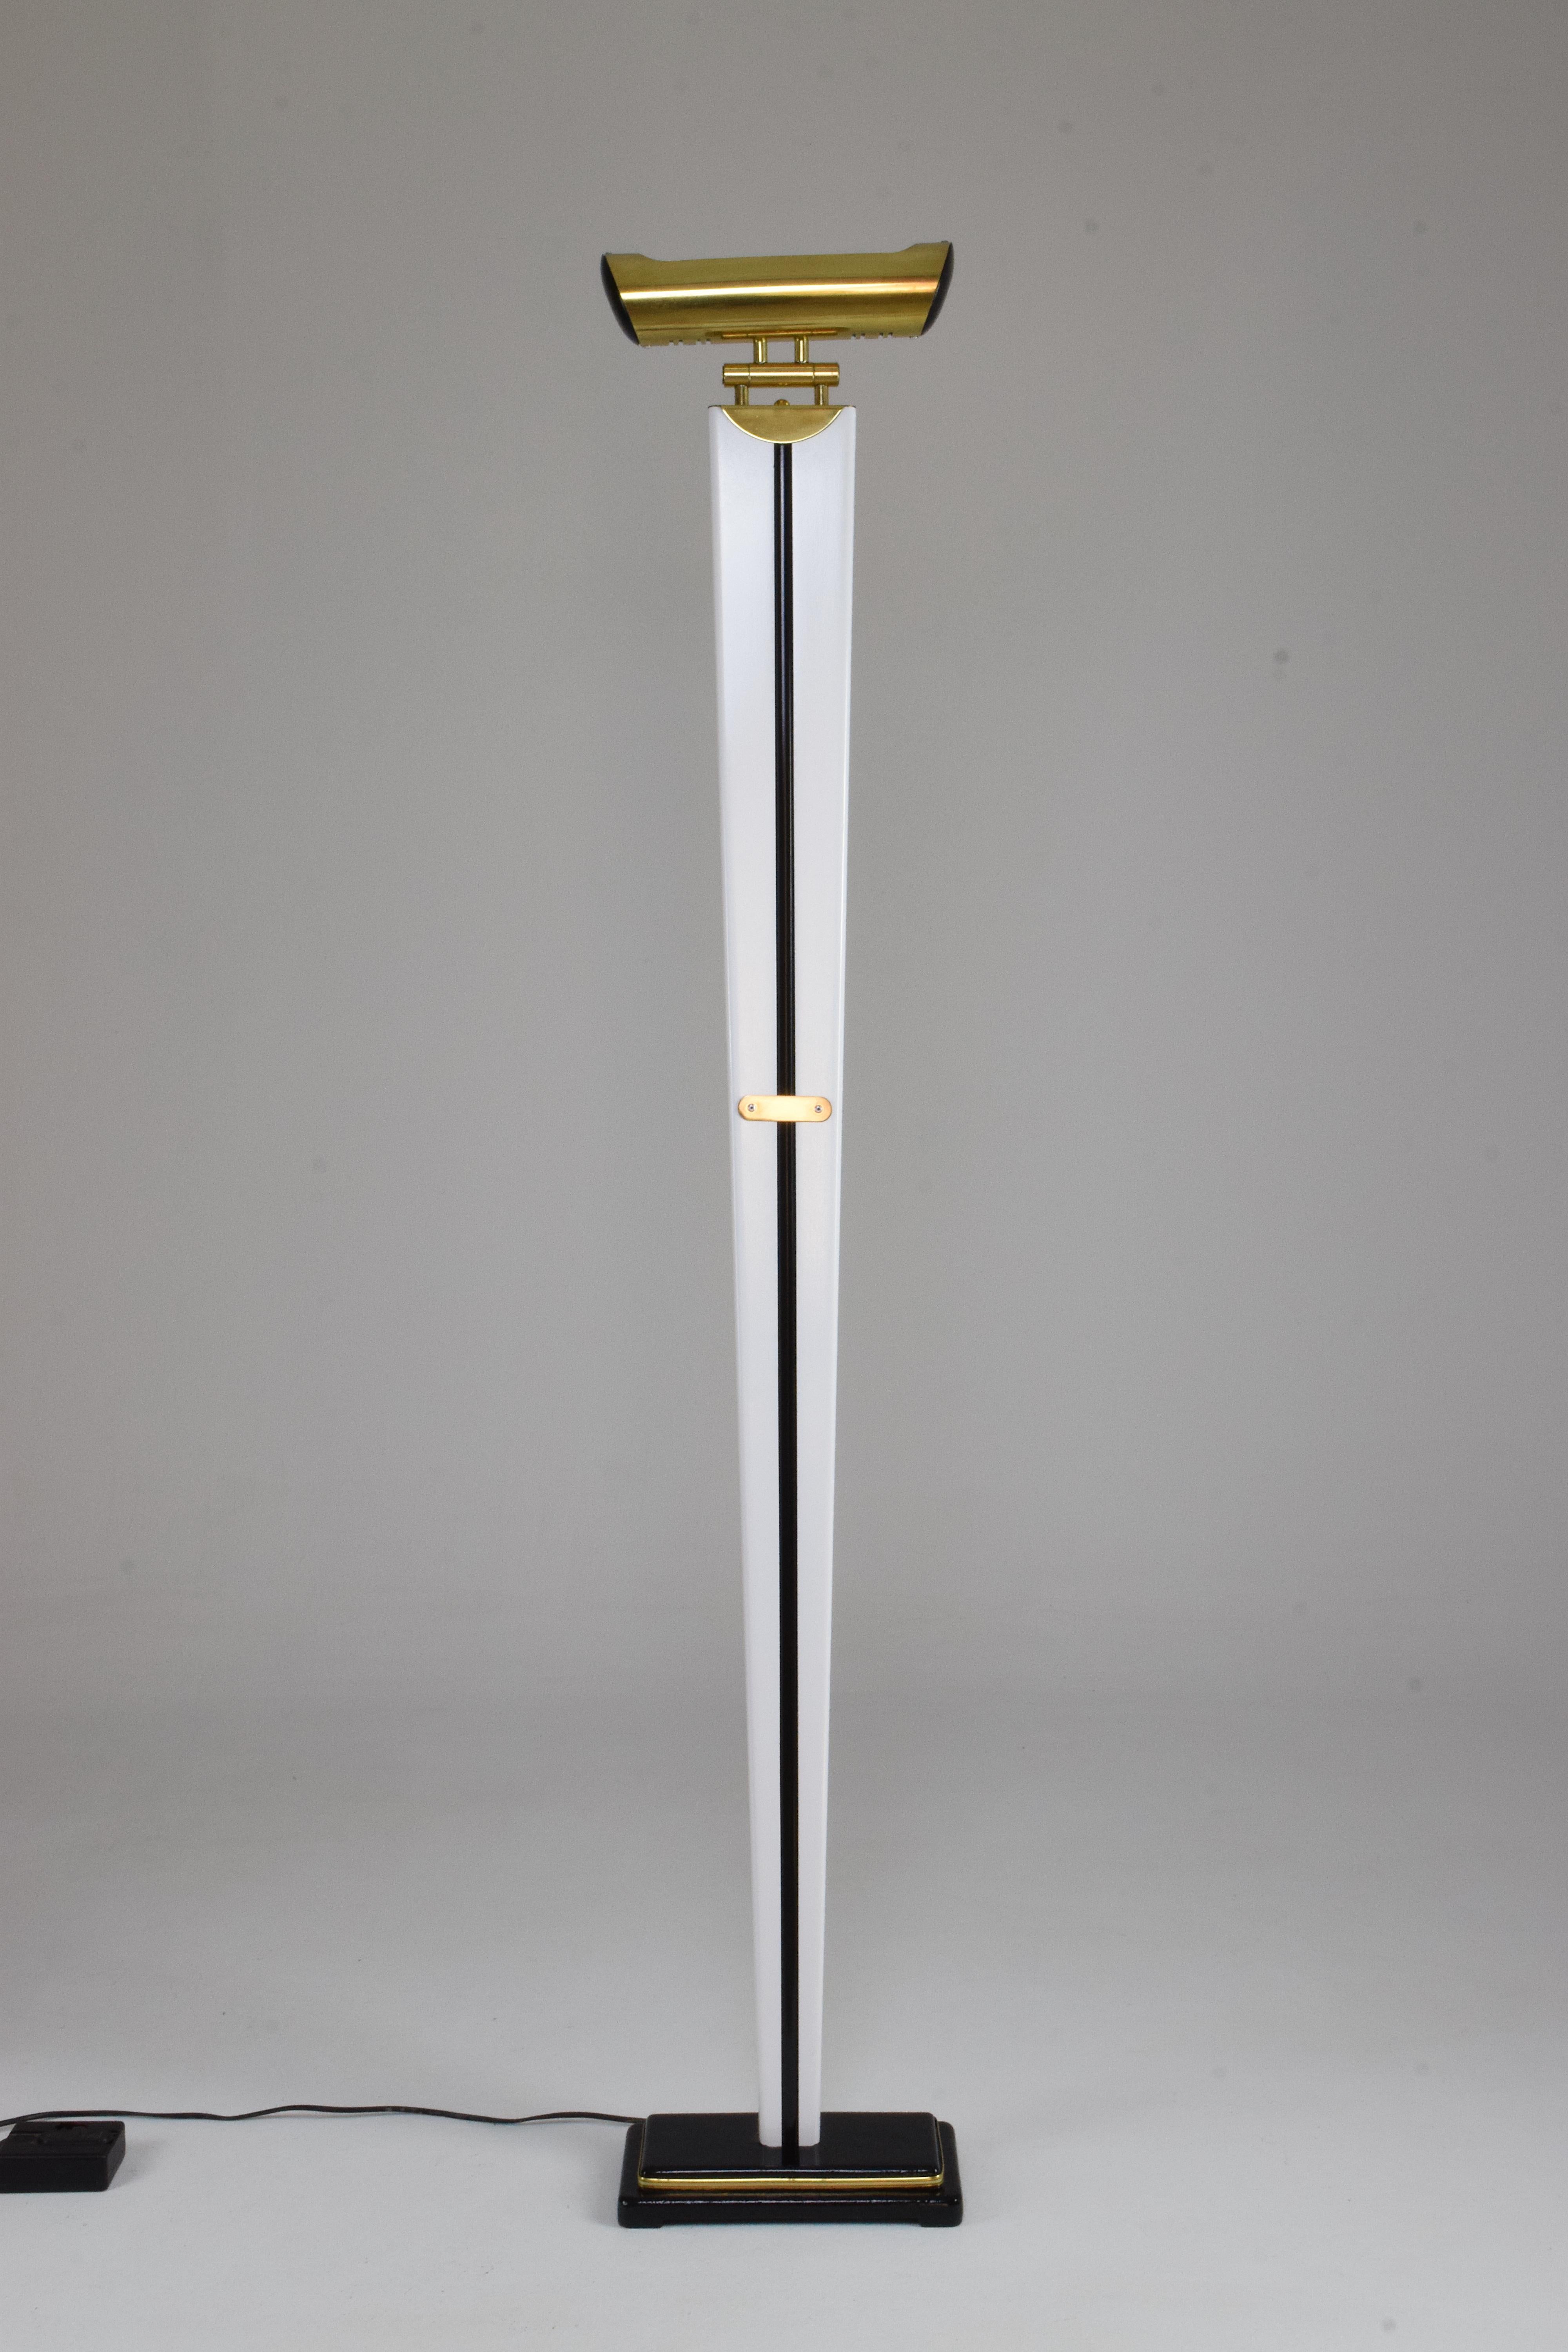 A stunning French vintage floor lamp from the 1970s in Art Deco style designed out of wood, brass and steel. In fully restored, re-lacquered condition. The shade articulates at the base. The wiring is with the original dimmer switch and has been